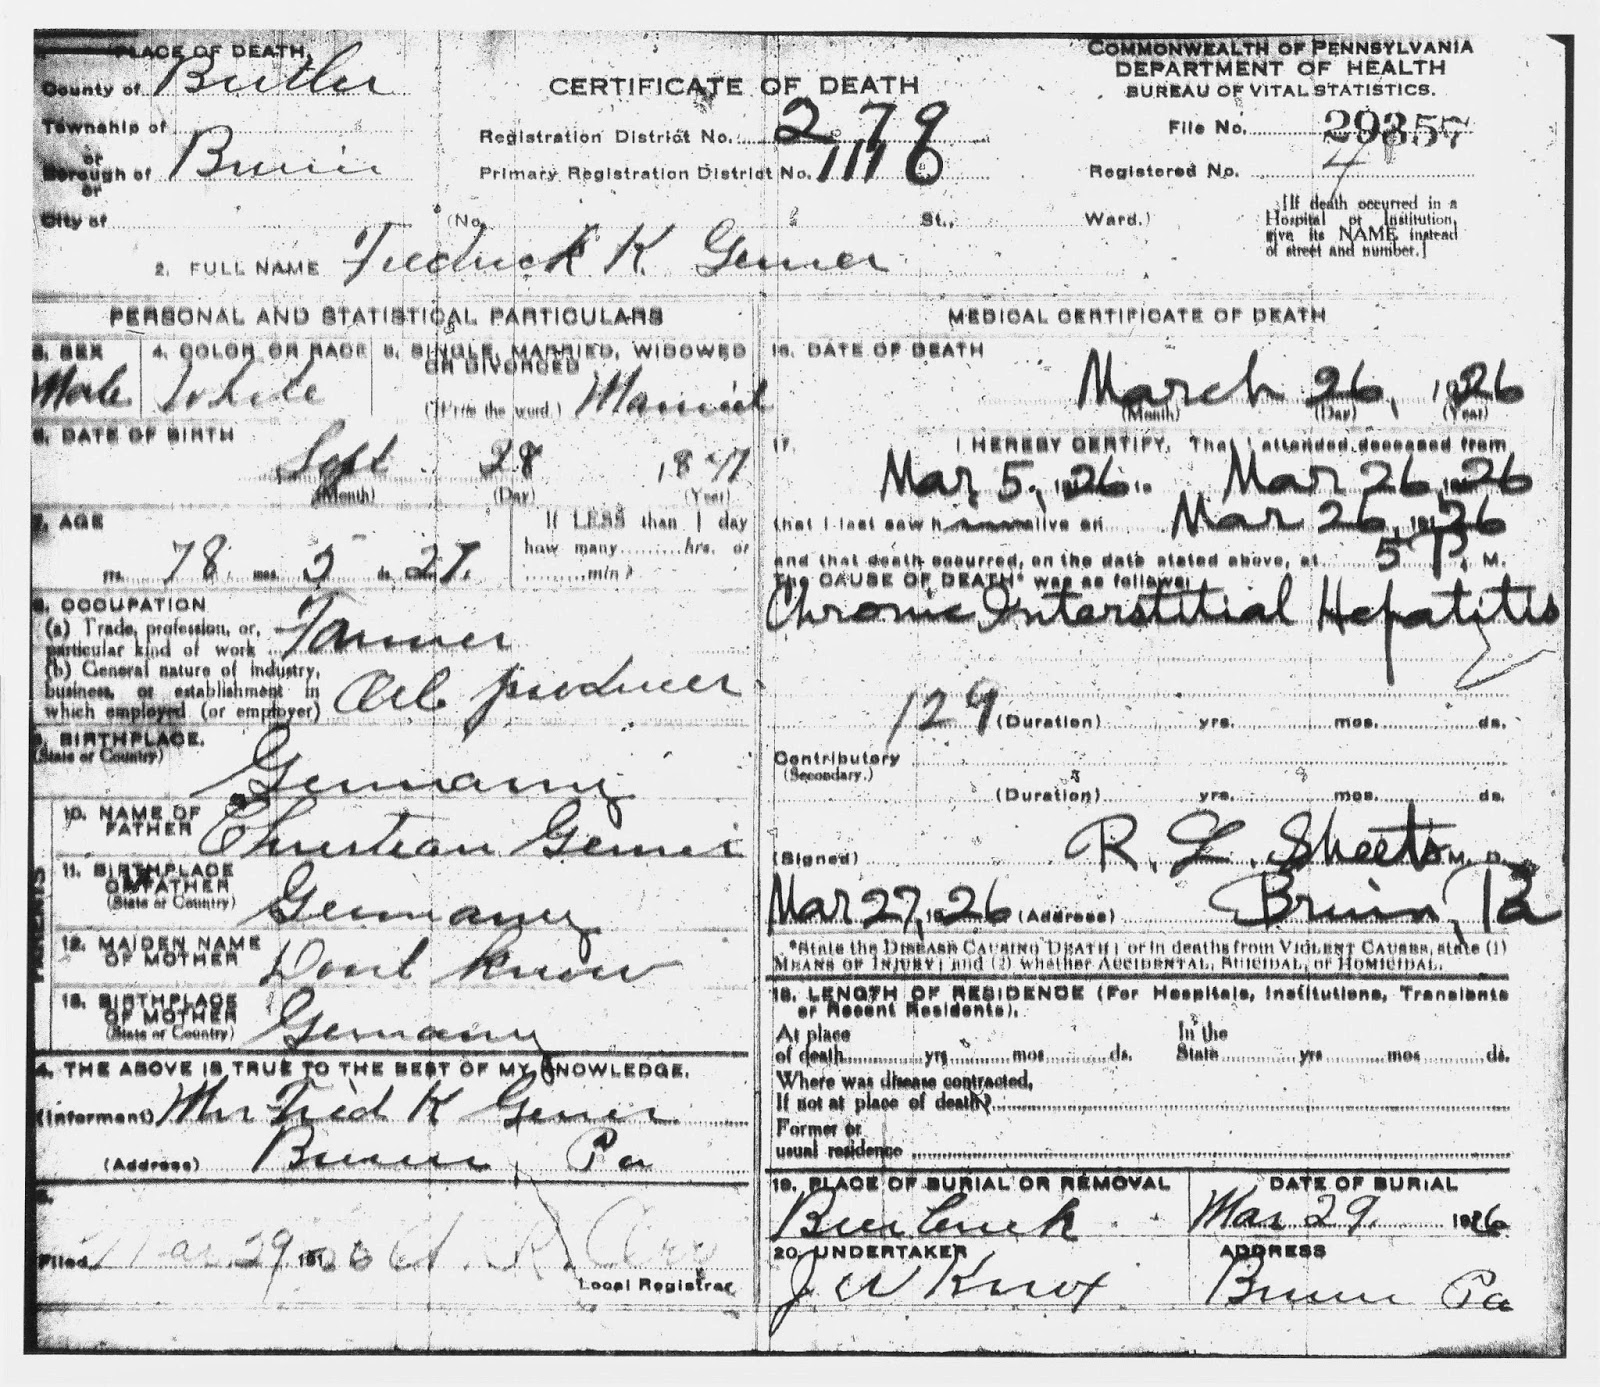 My Ancestors and Me: The Surprise in Fred Gerner's Death Certificate